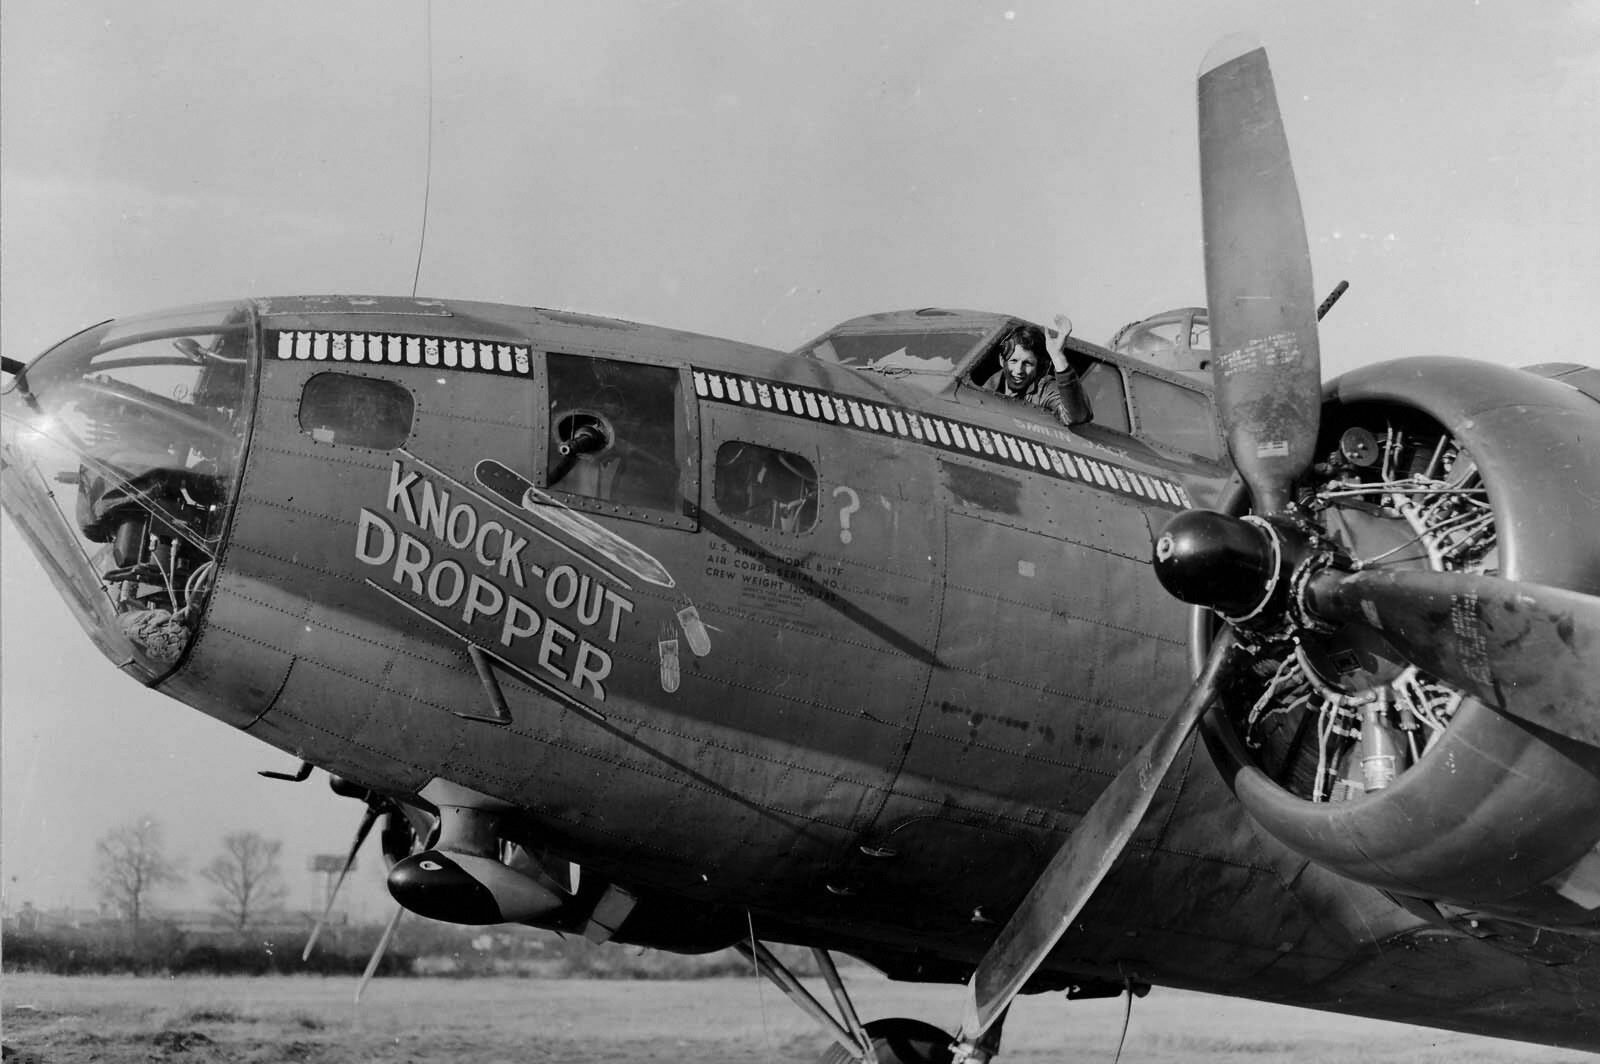 Knock-Out Dropper from the 303rd Bomb Group survived 75 missions over Germany before returning to the United States.